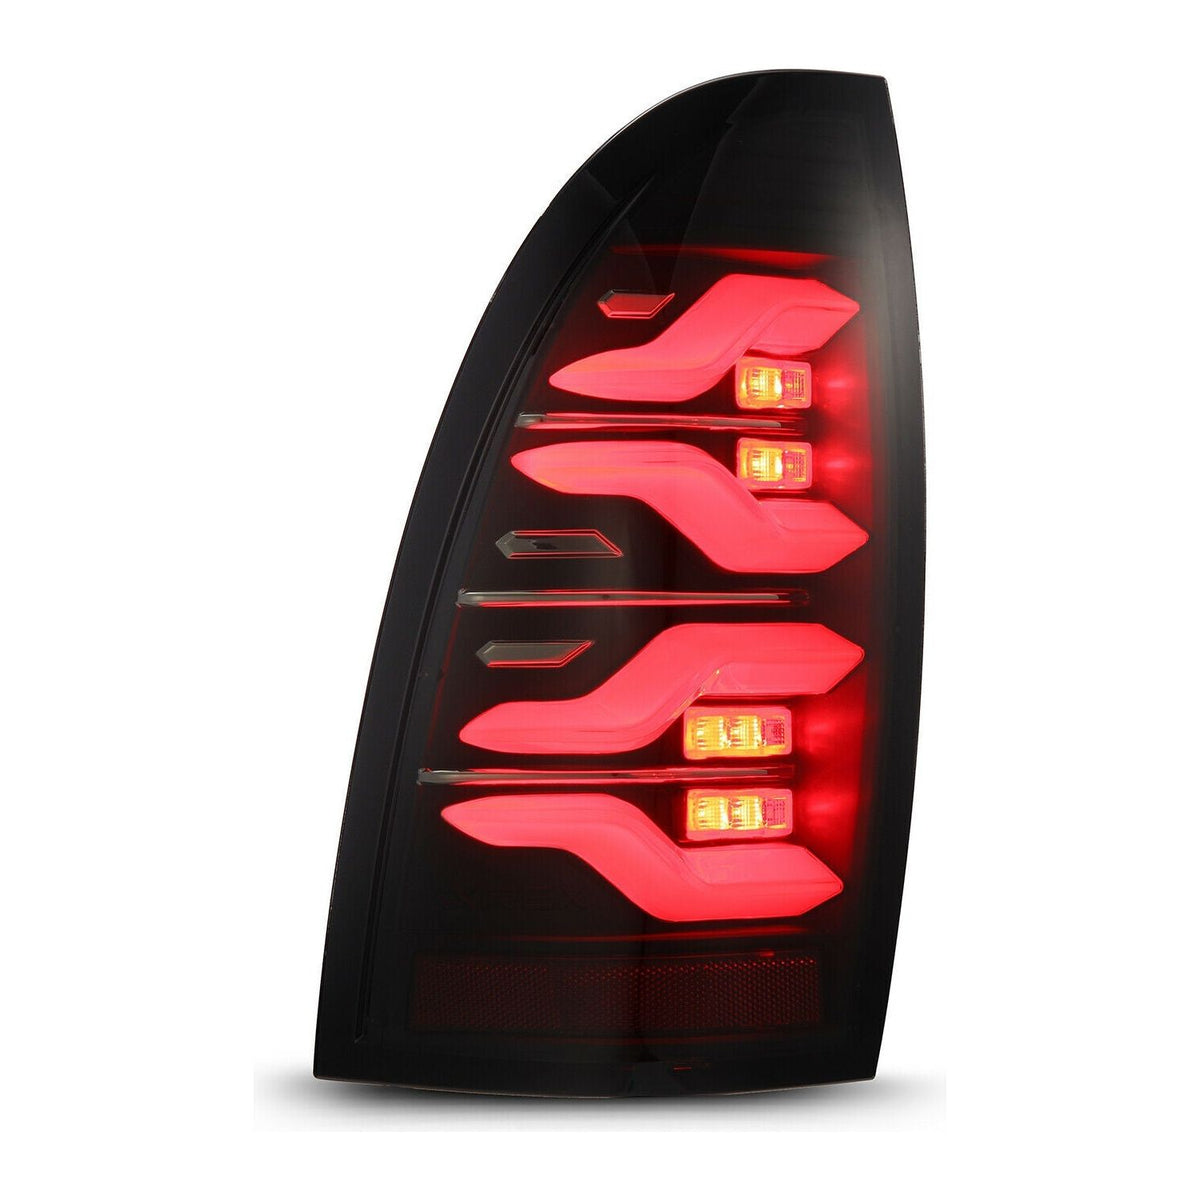 2005-2015 Toyota Tacoma | AlphaRex LUXX-Series LED Tail Lights Black - Truck Accessories Guy